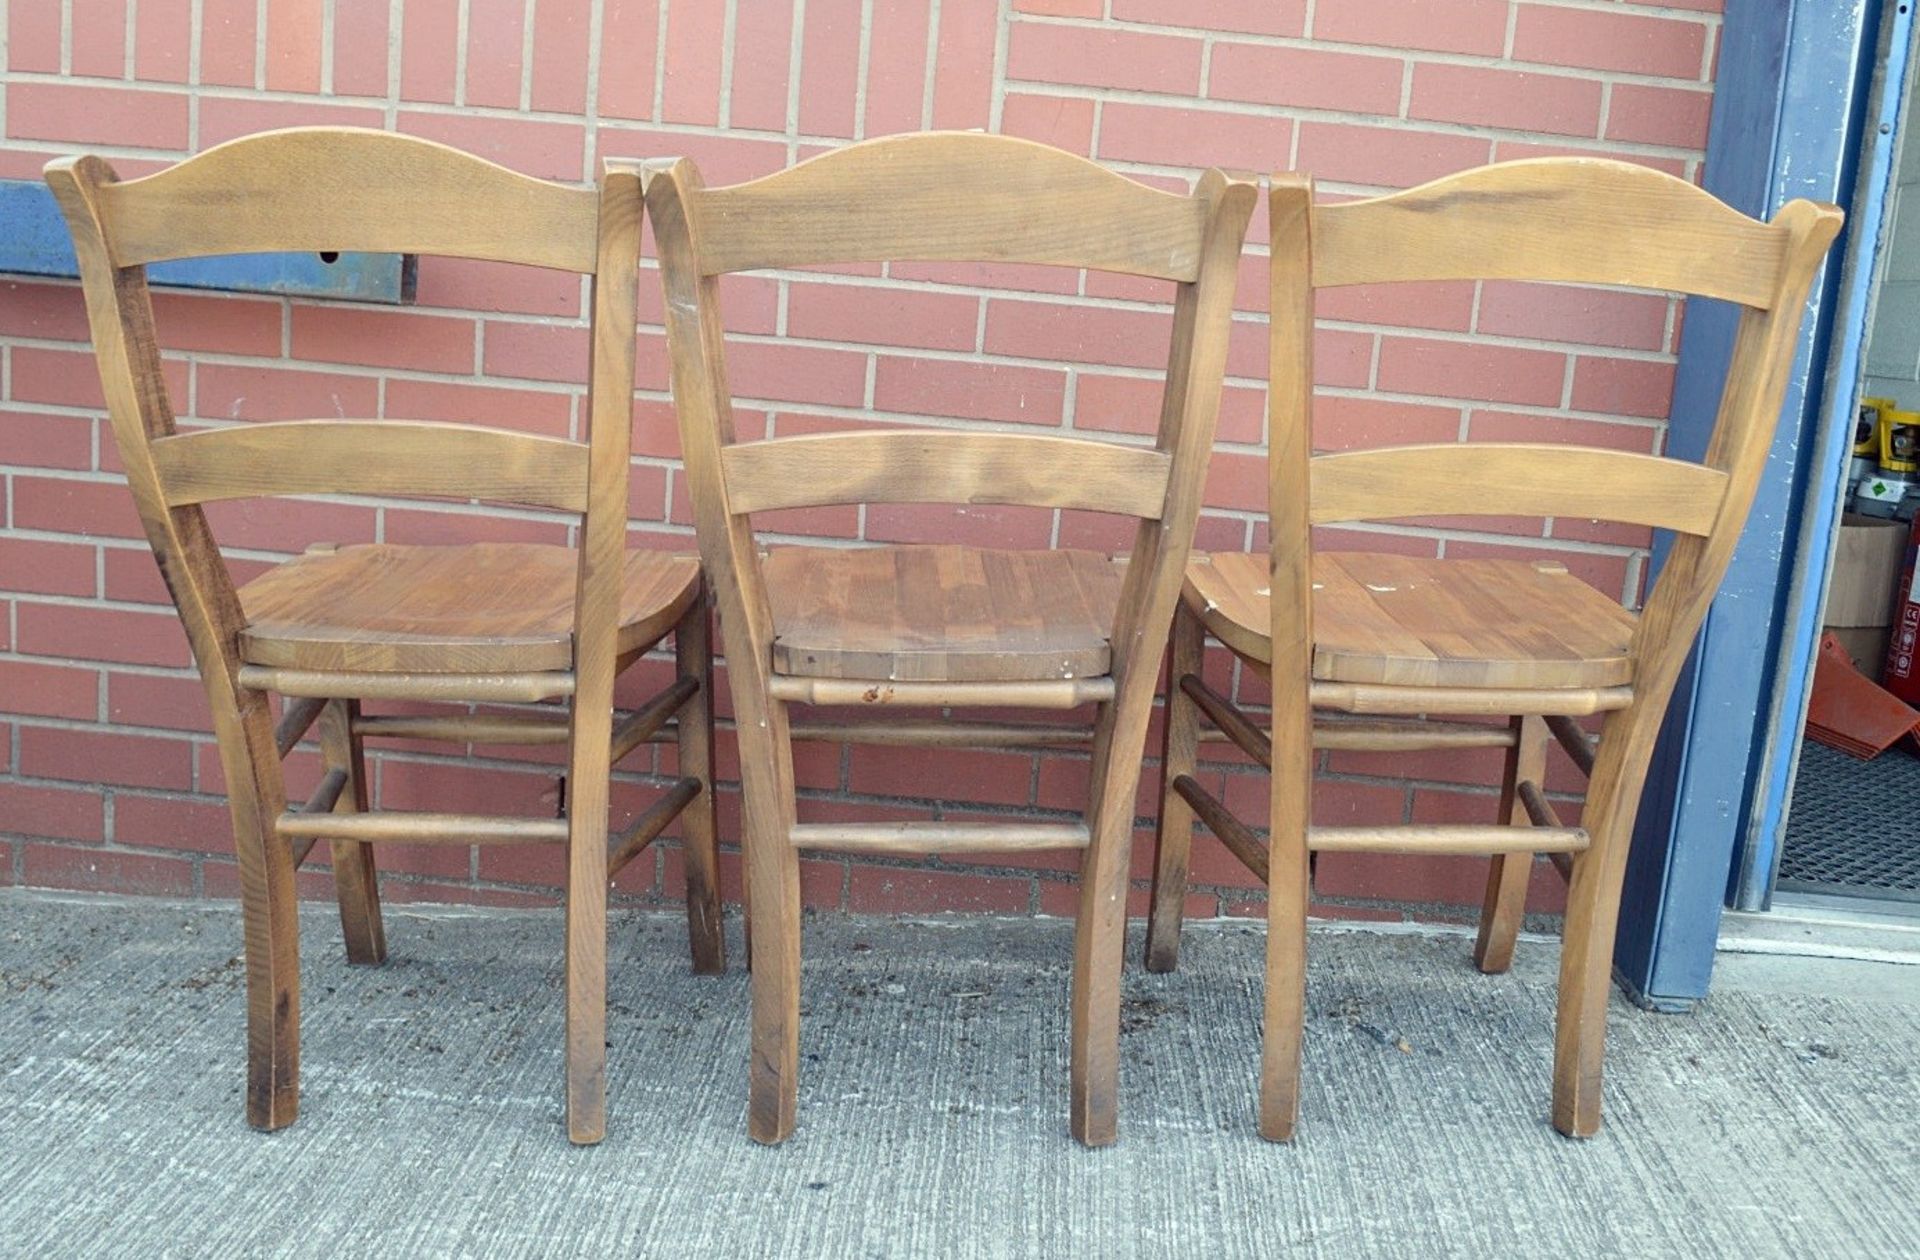 3 x Matching Sturdy Solid Wood Chairs With An Attractive Varnished Finish - Dimensions: H90 x W47 - Bild 2 aus 7